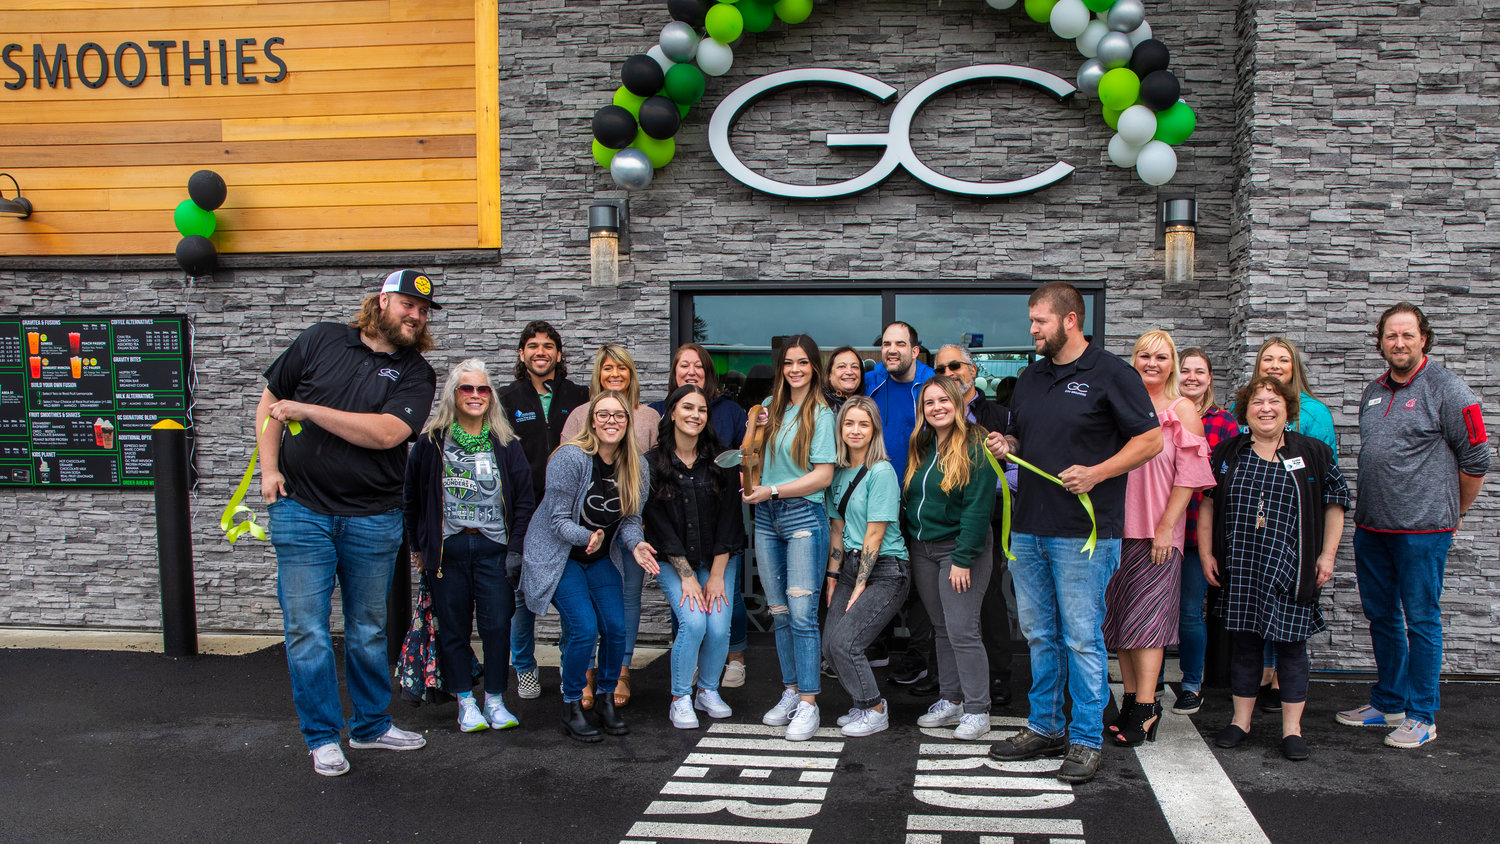 Attendees smile for a photo outside Gravity Coffee during a grand opening and ribbon-cutting ceremony Friday in Centralia. The event was hosted by the Centralia-Chehalis Chamber of Commerce. The business is located at 712 Harrison Ave., Centralia.